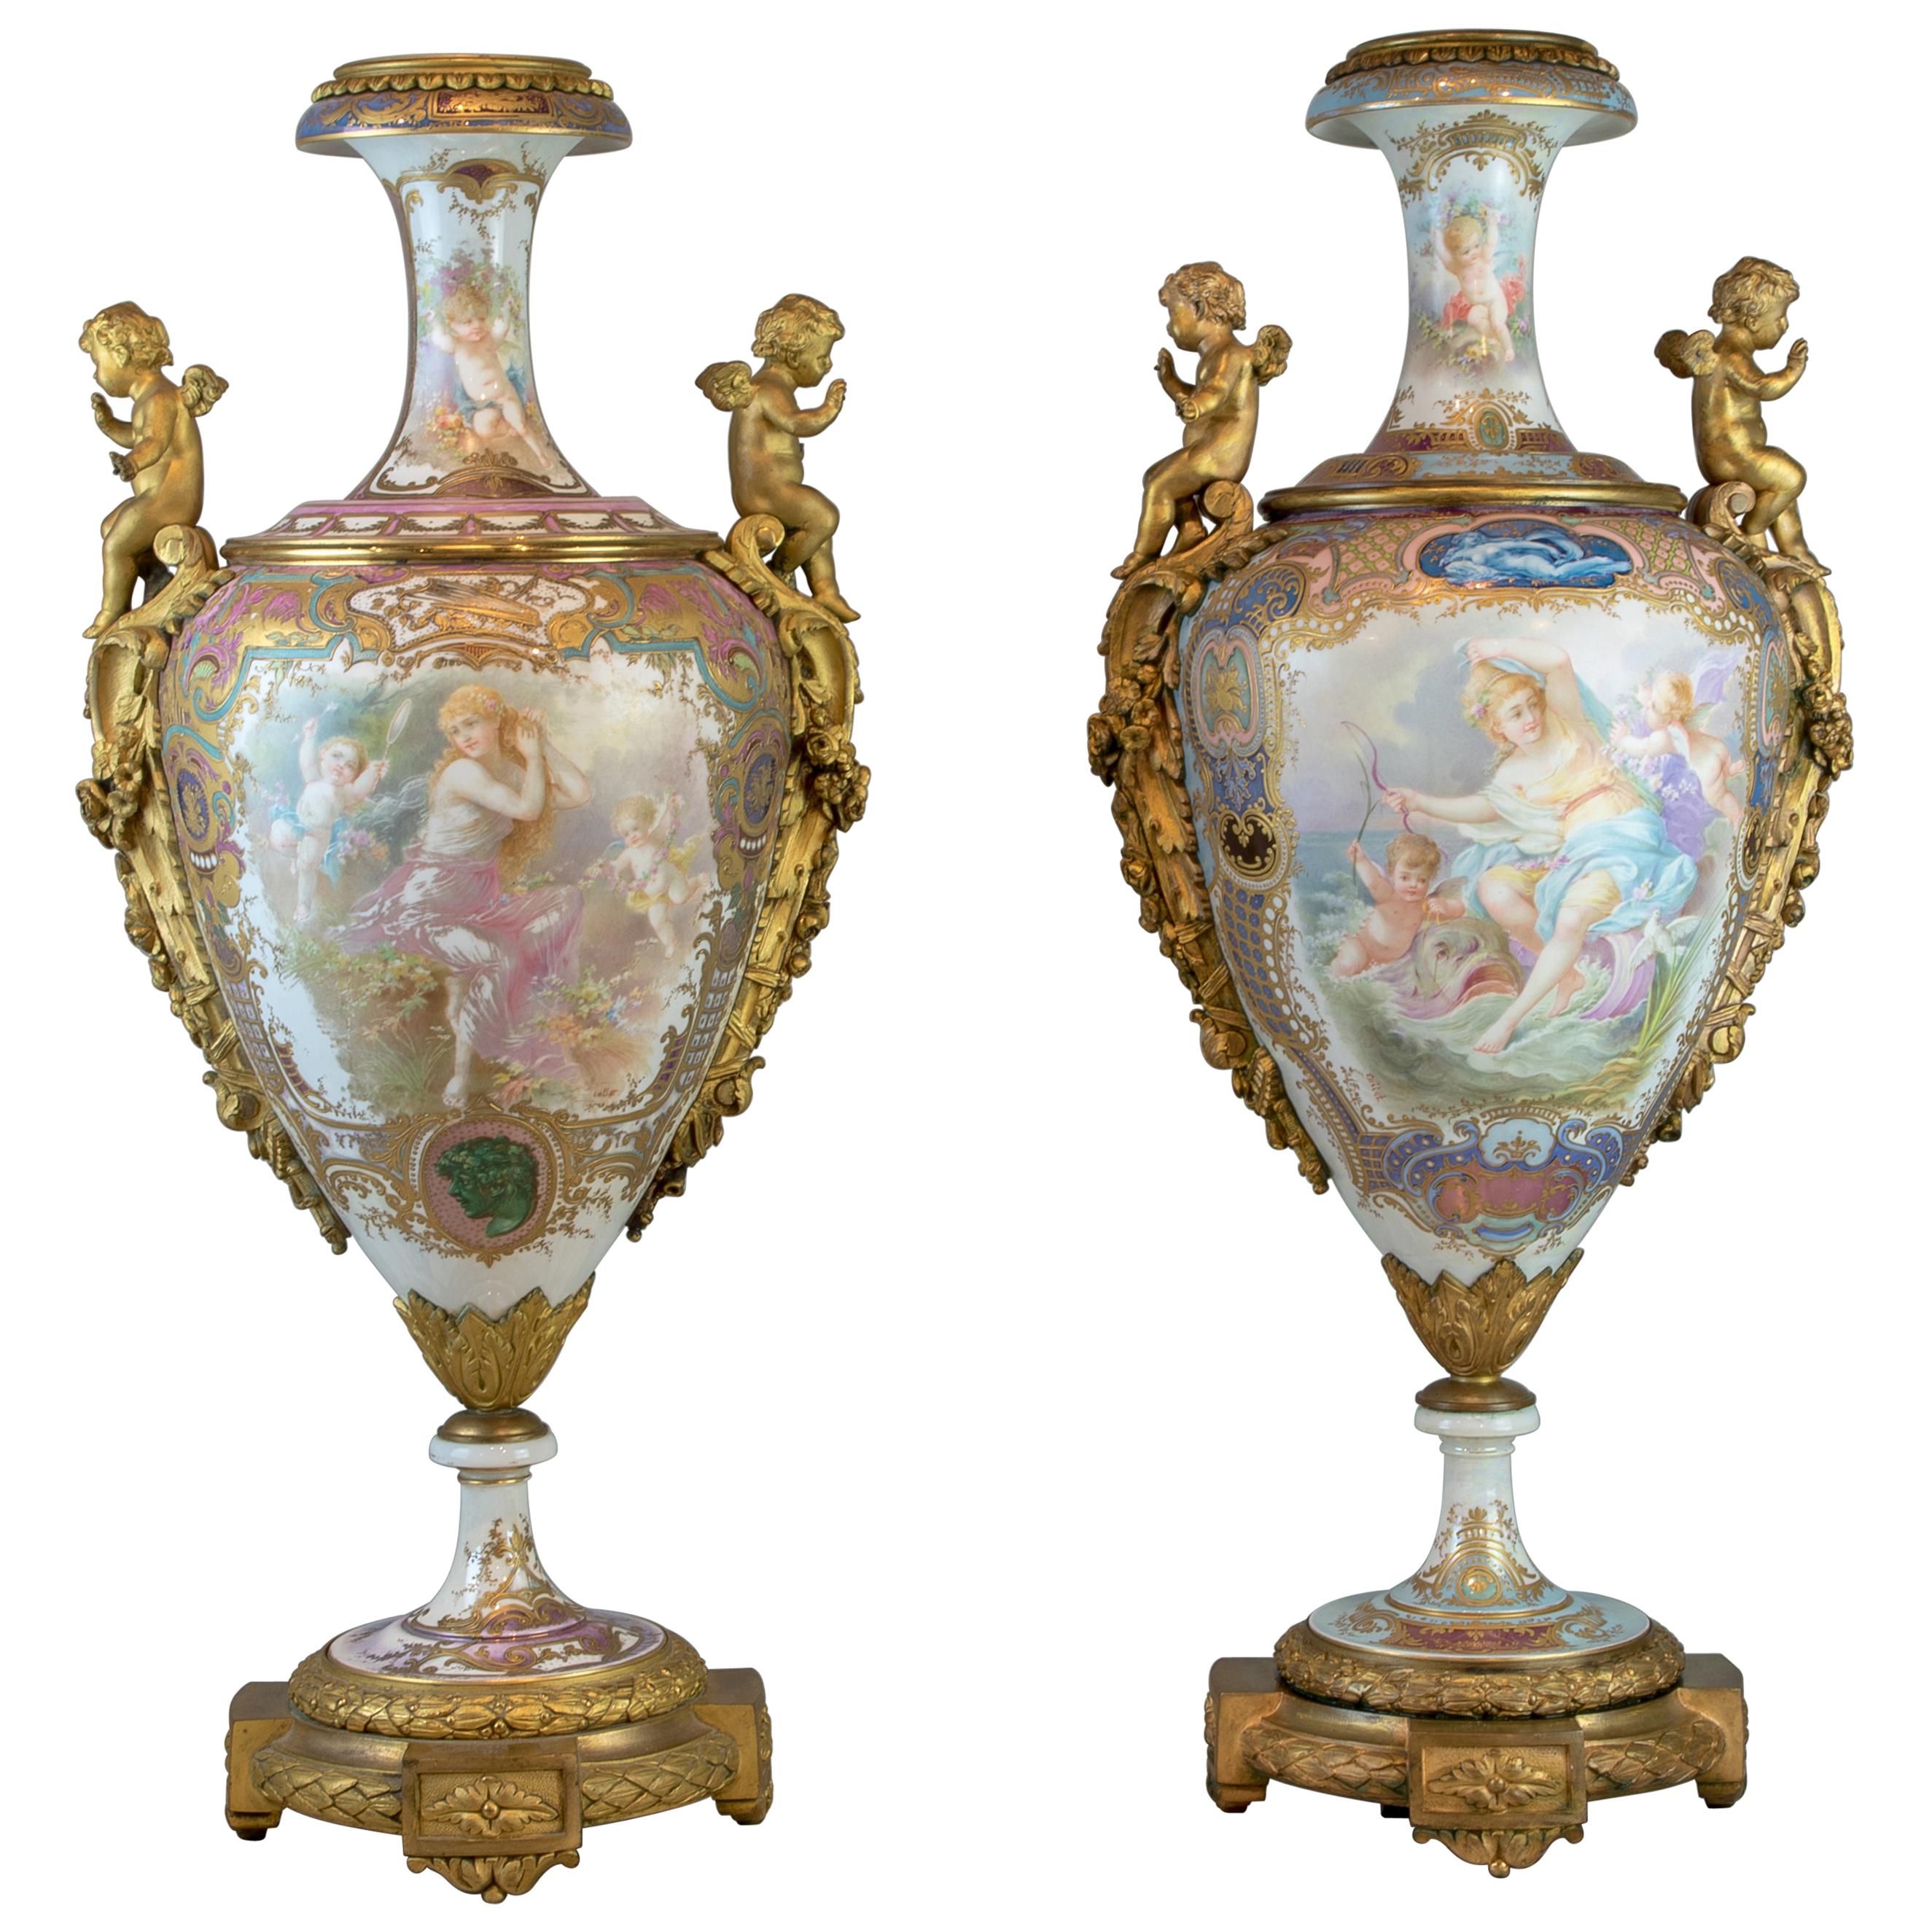 Pair of Bronze Mounted Sèvres-Style Polychrome and Gilt Porcelain Vase